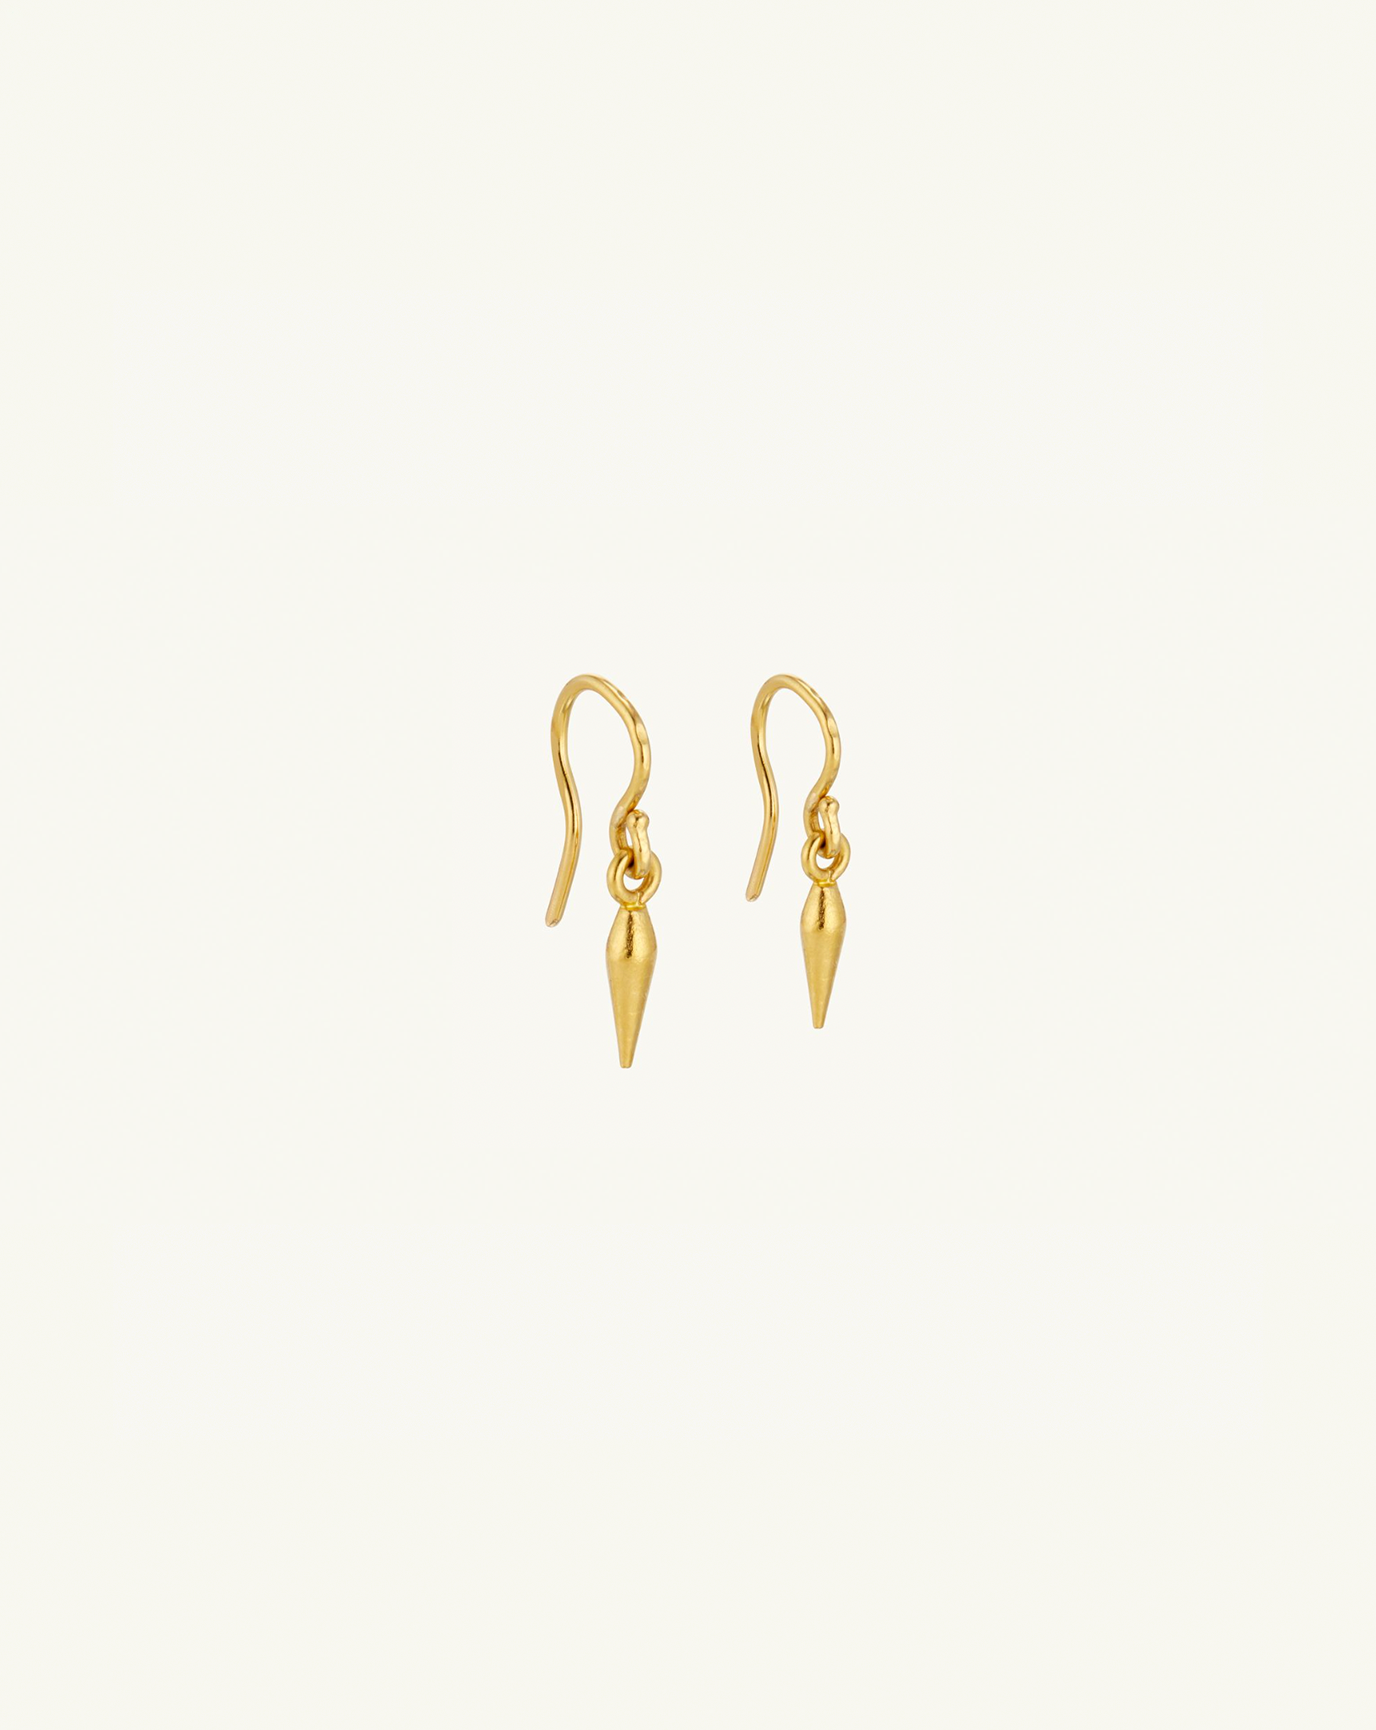 Side view showing the back, product image of the seed-inspired gold drop earrings 